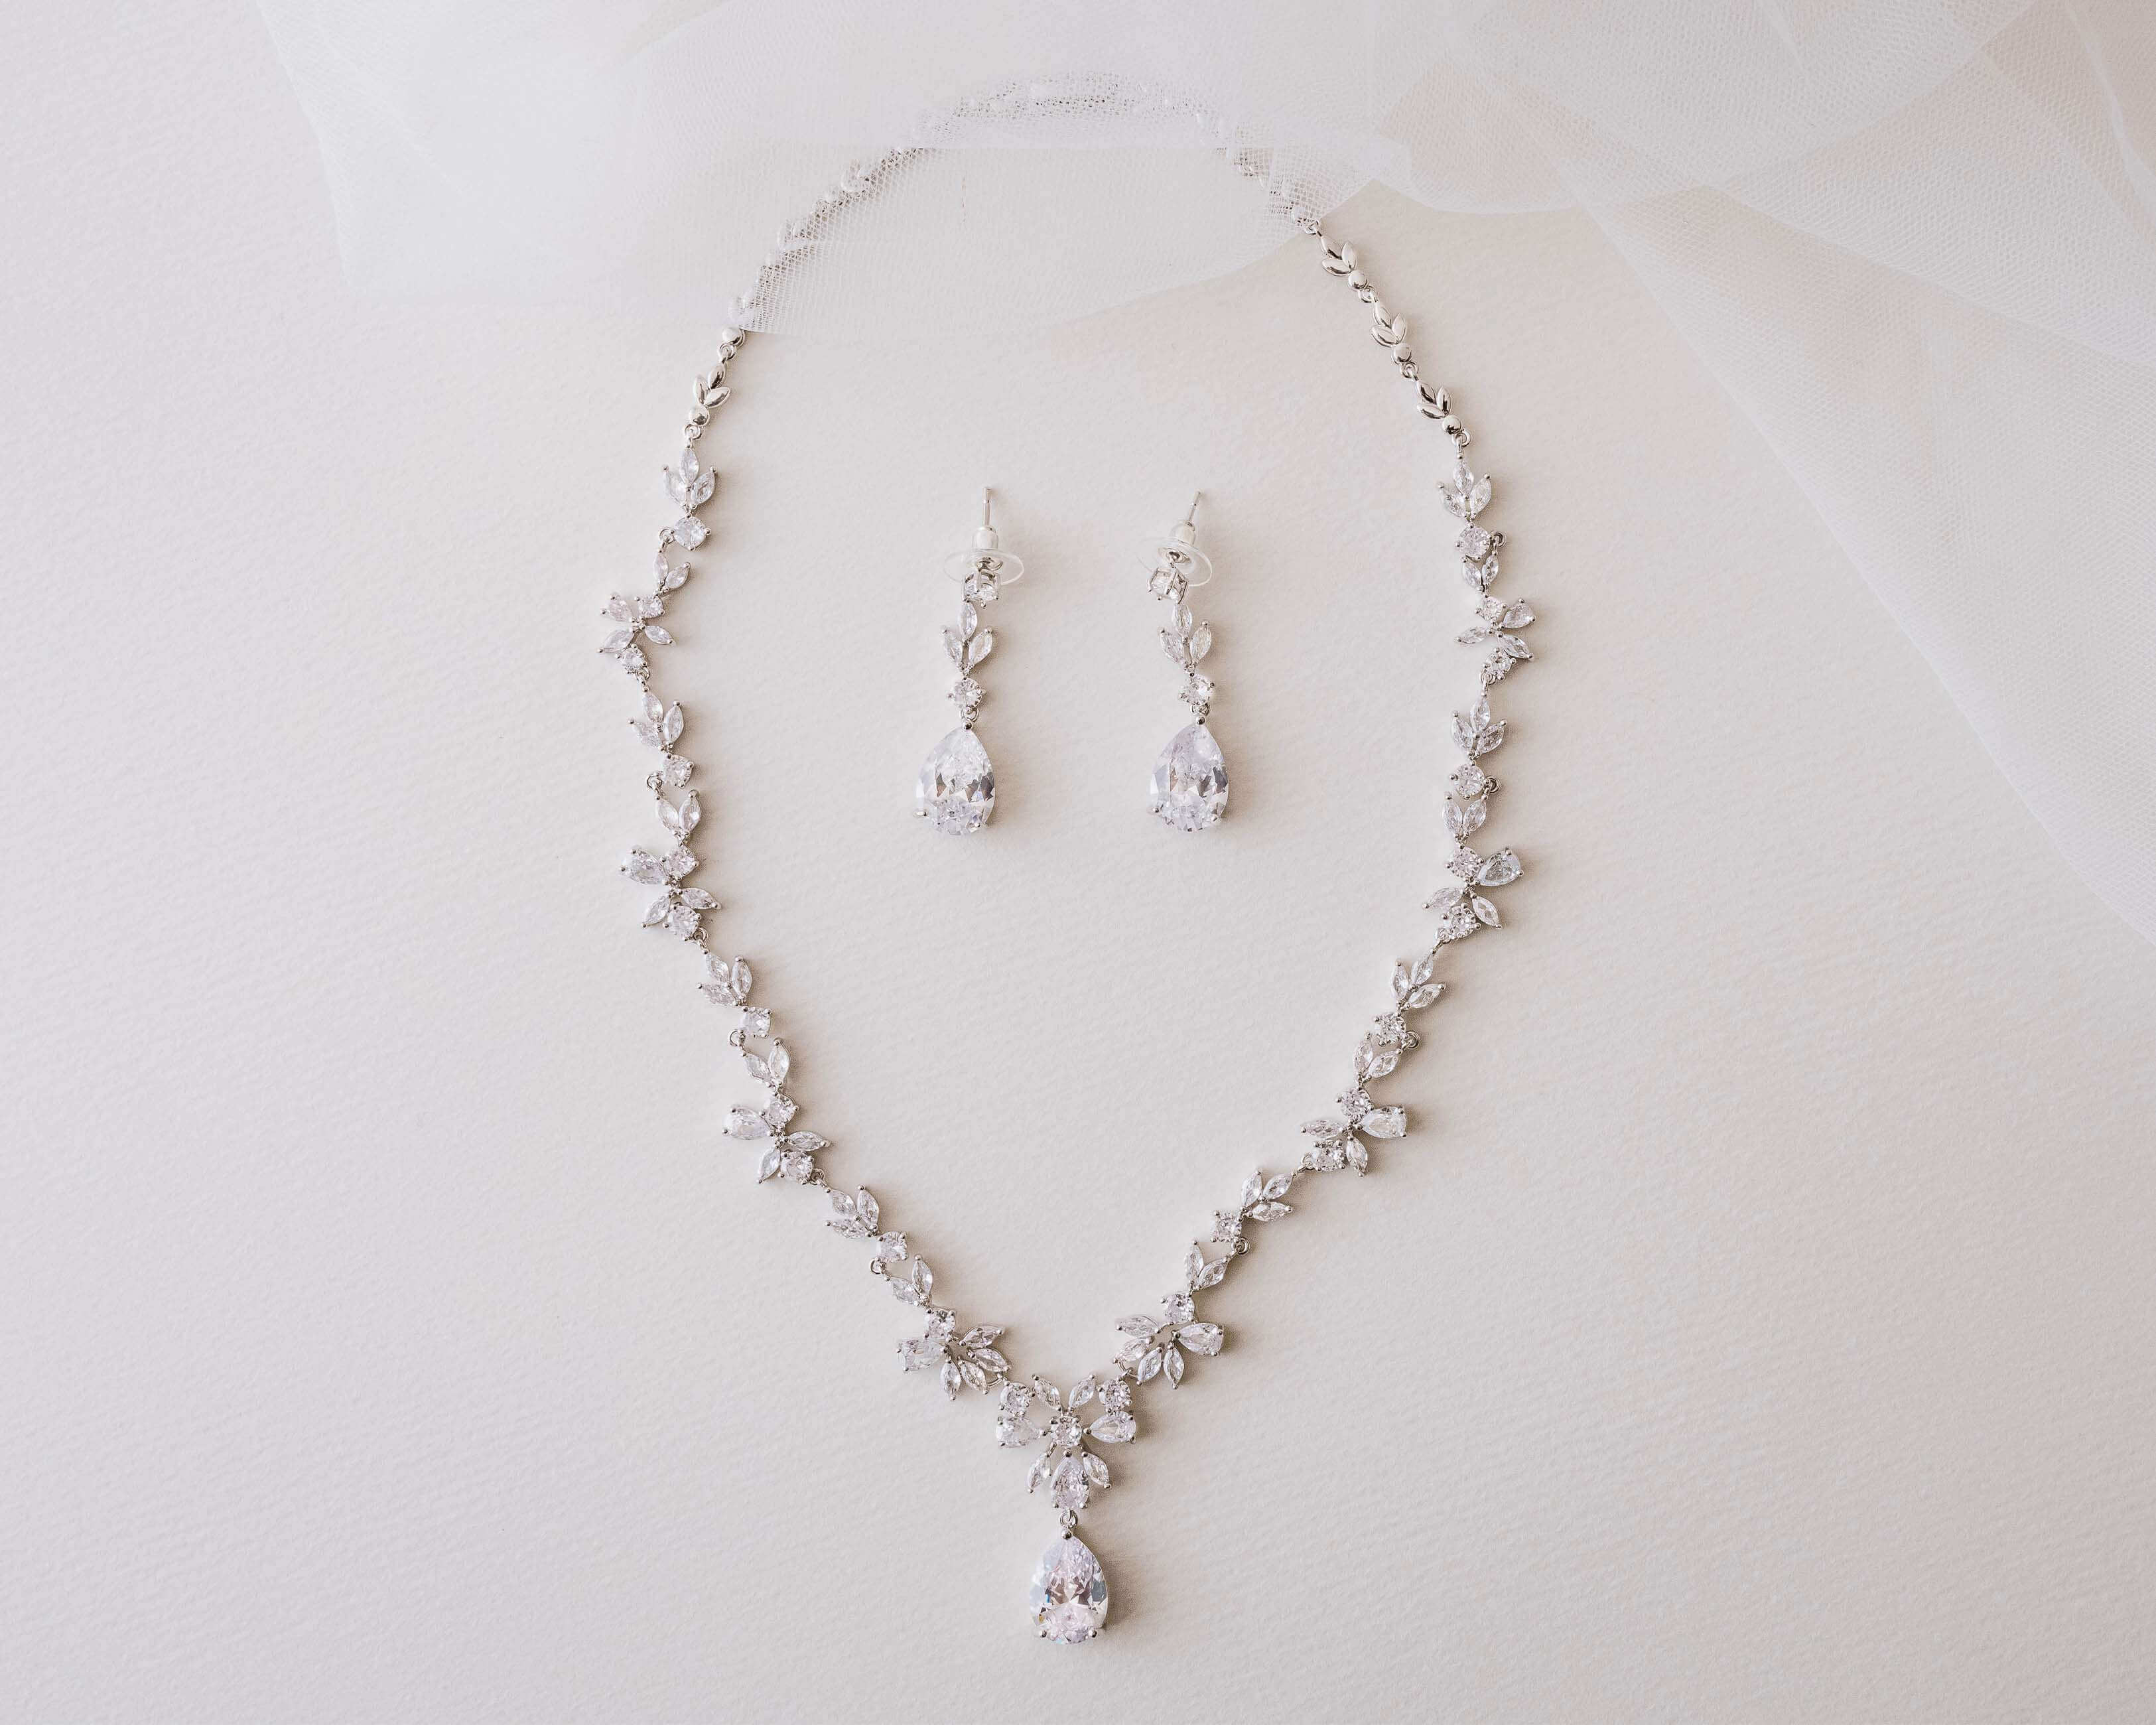 Silver  Crystal Bridal Necklace Earrings Set - The perfect wedding jewelry.